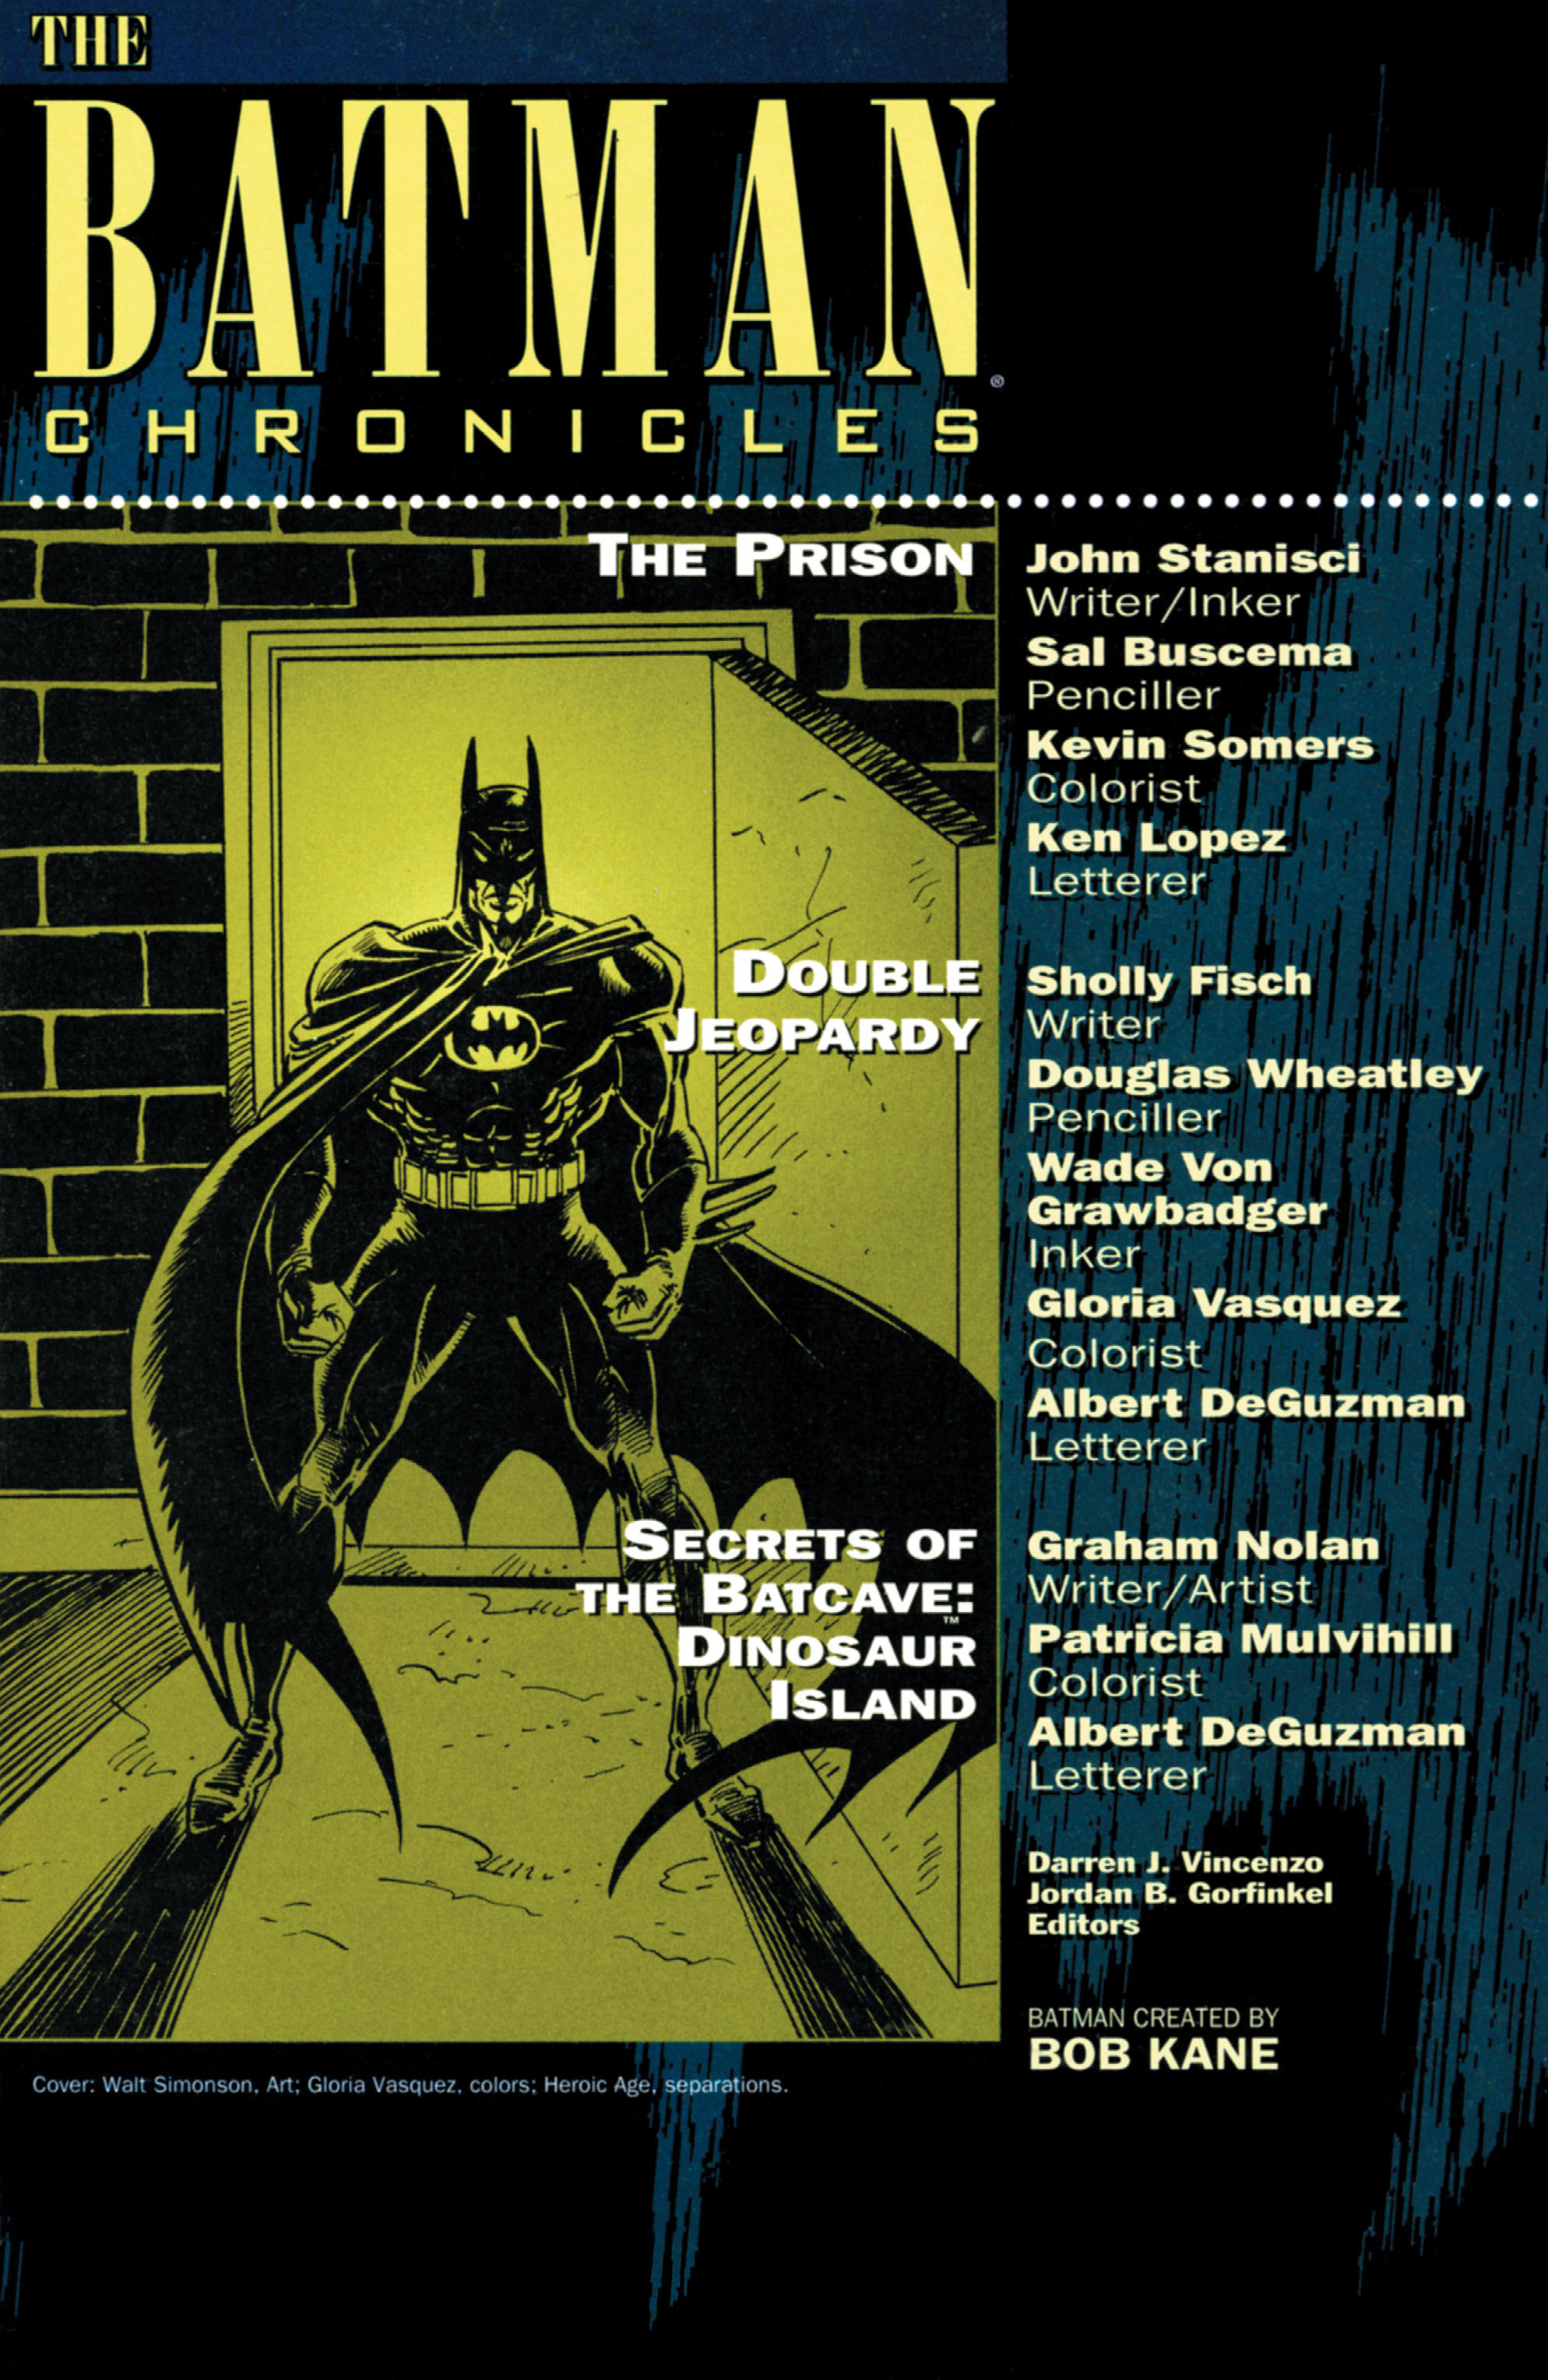 The Batman Chronicles 1995 Issue 20, Read The Batman Chronicles 1995 Issue  20 comic online in high quality. Read Full Comic online for free - Read  comics online in high quality .